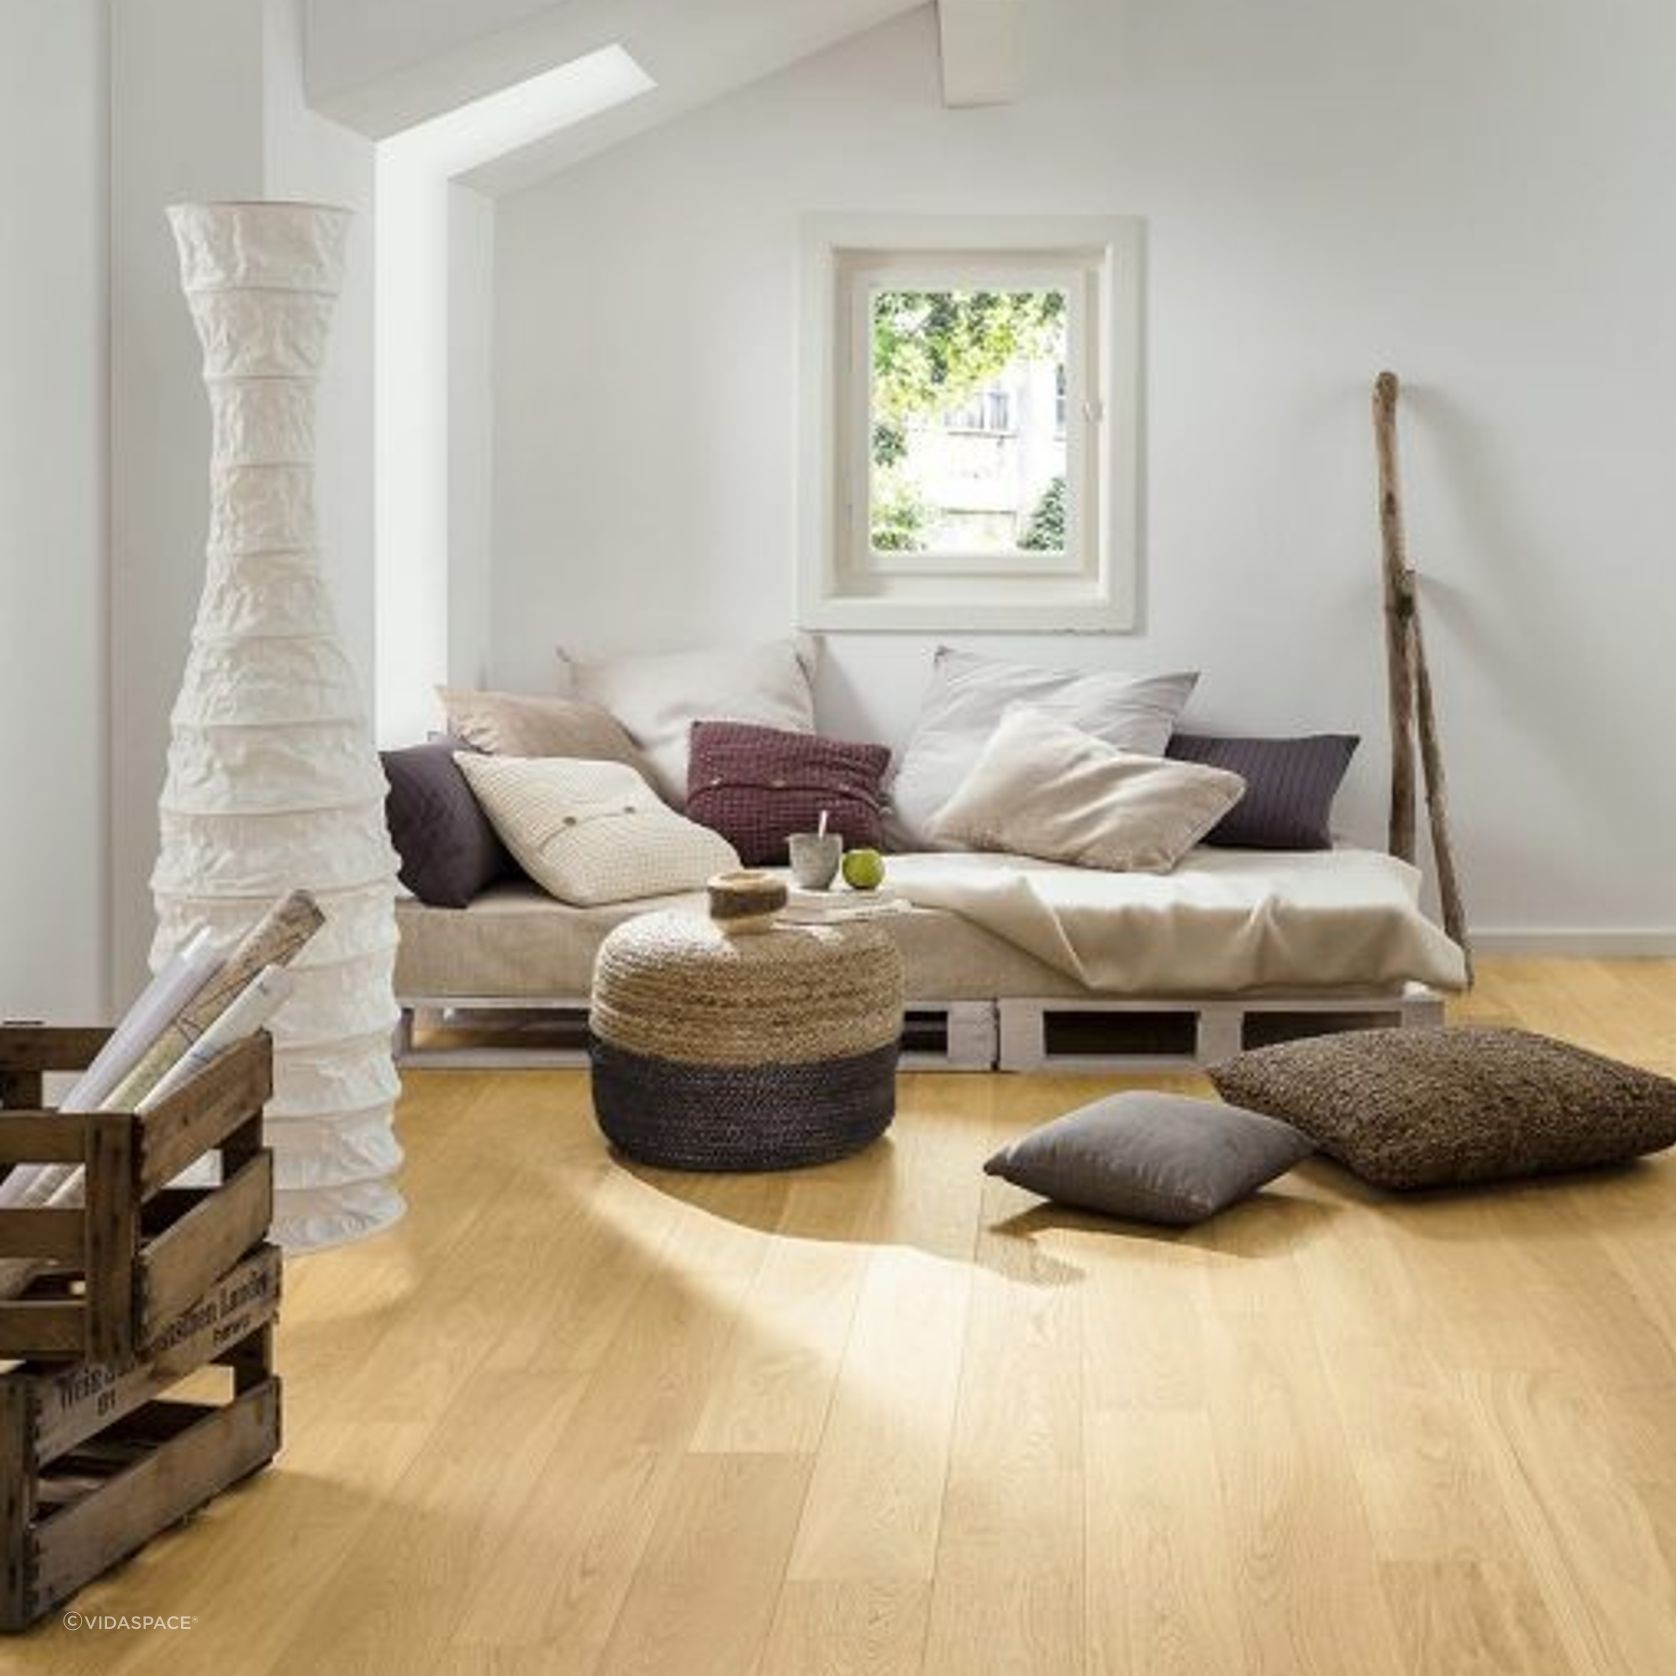 Essence Oak Wide Parky Timber Flooring gallery detail image